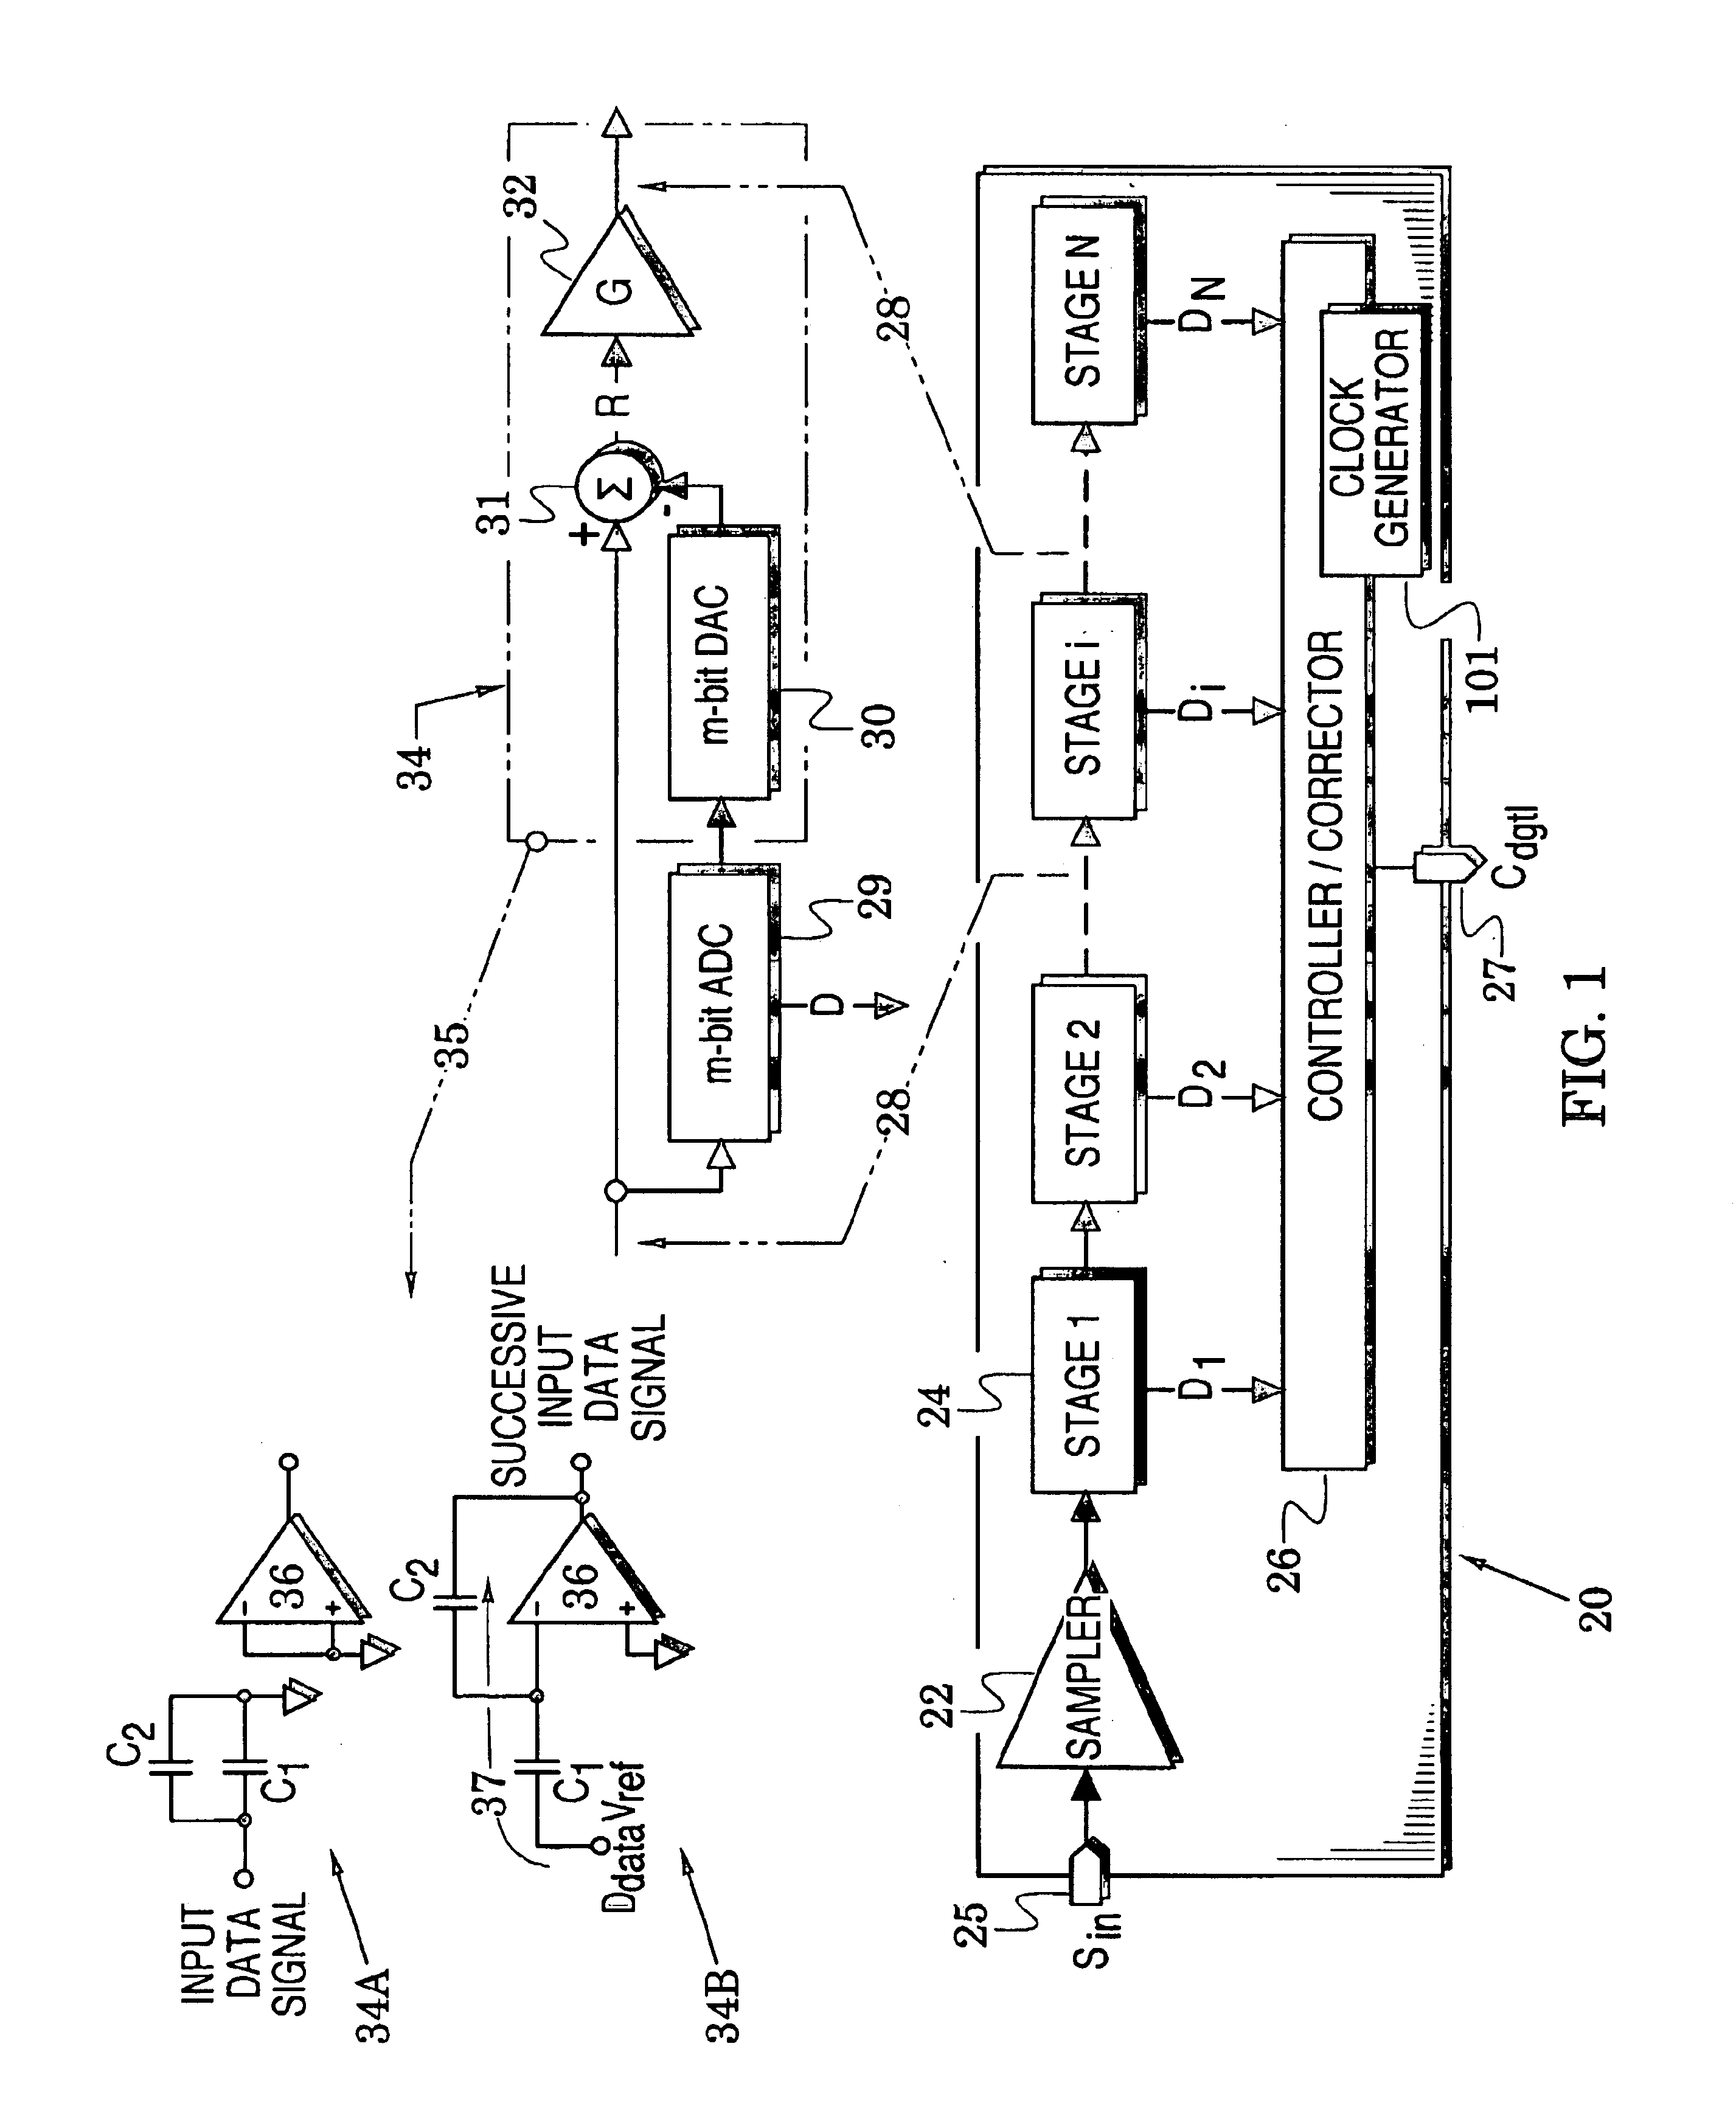 Analog-to-digital converter methods and structures for interleavably processing data signals and calibration signals